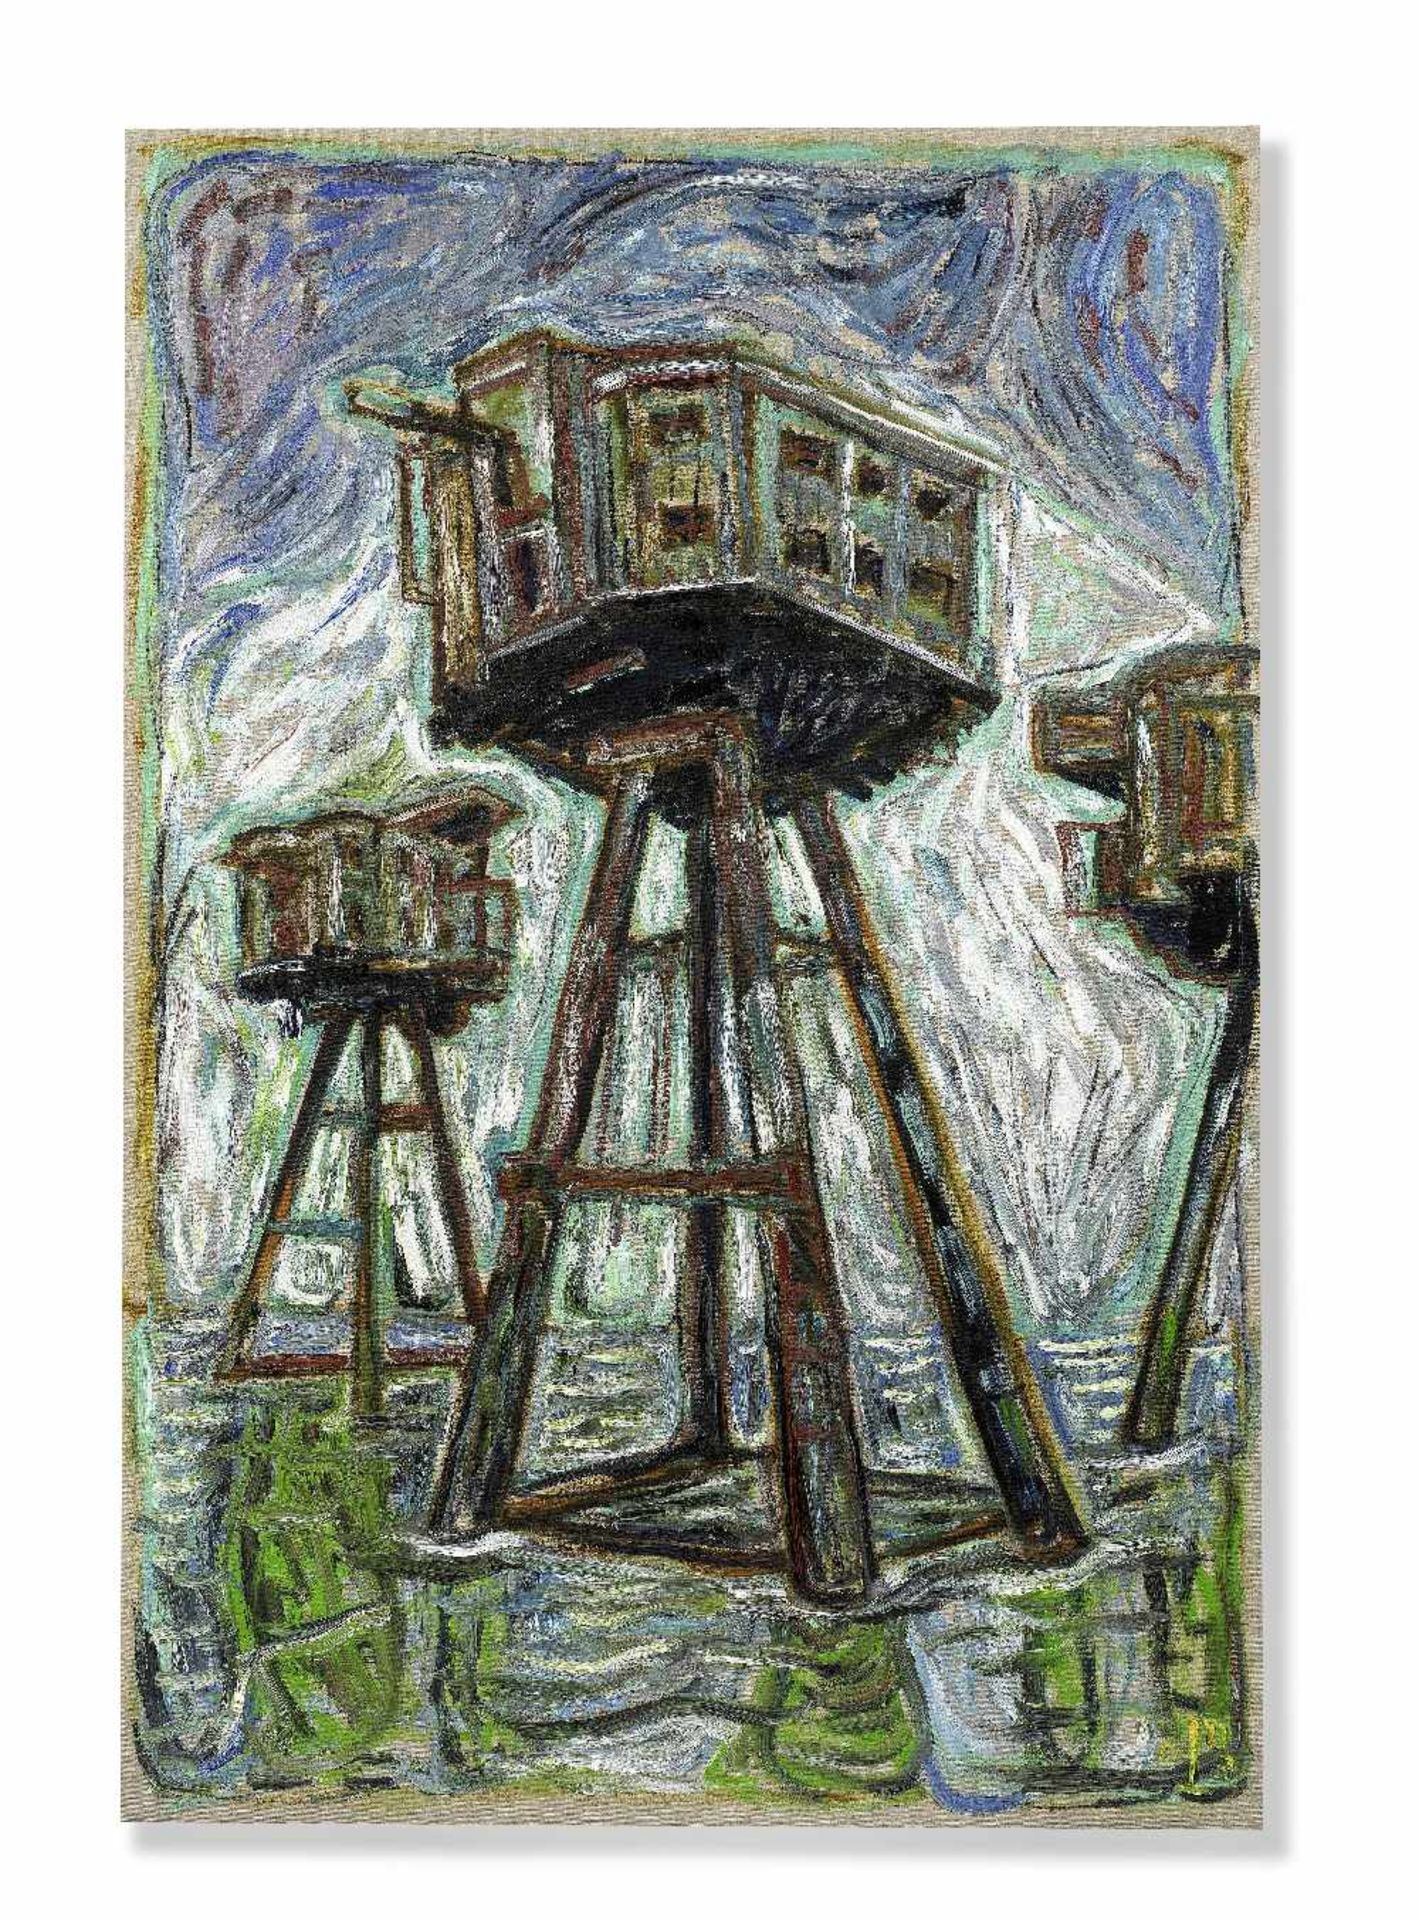 BILLY CHILDISH (B. 1959) Shivering Sands (The Forts) 2007